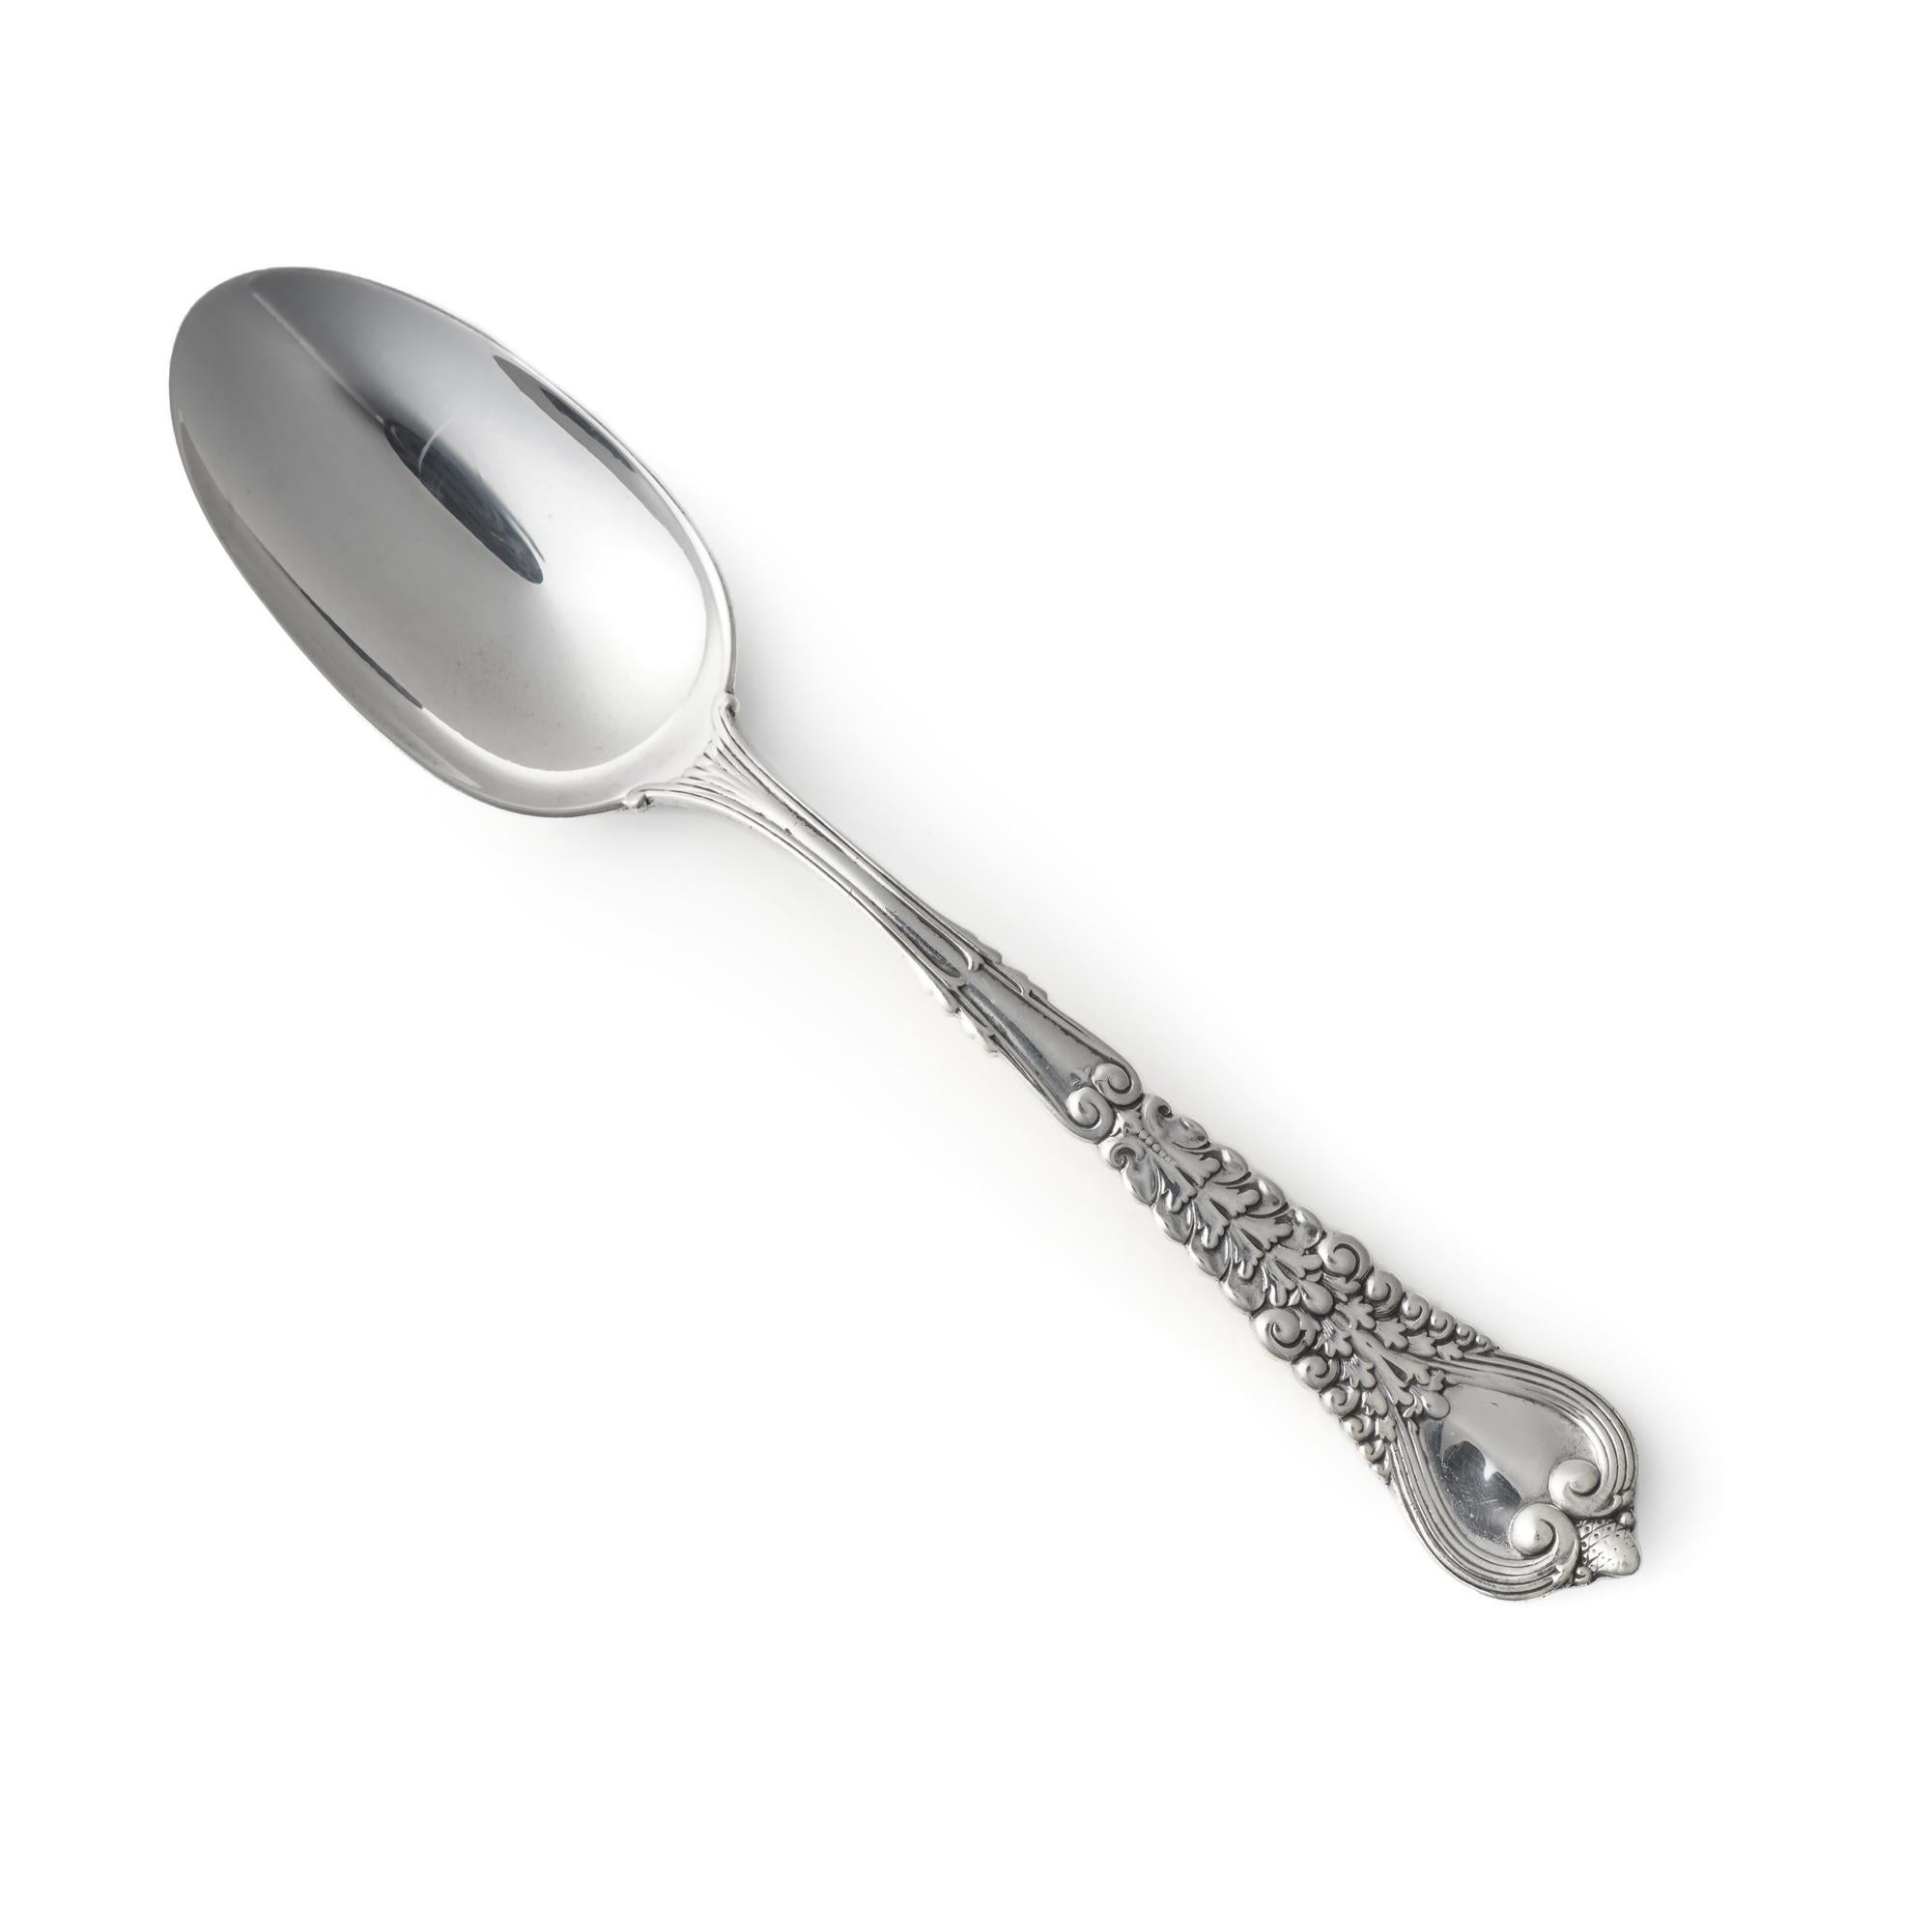 Antique Tiffany & Co. Sterling Silver Florentine Pattern Large Spoon For Sale 3